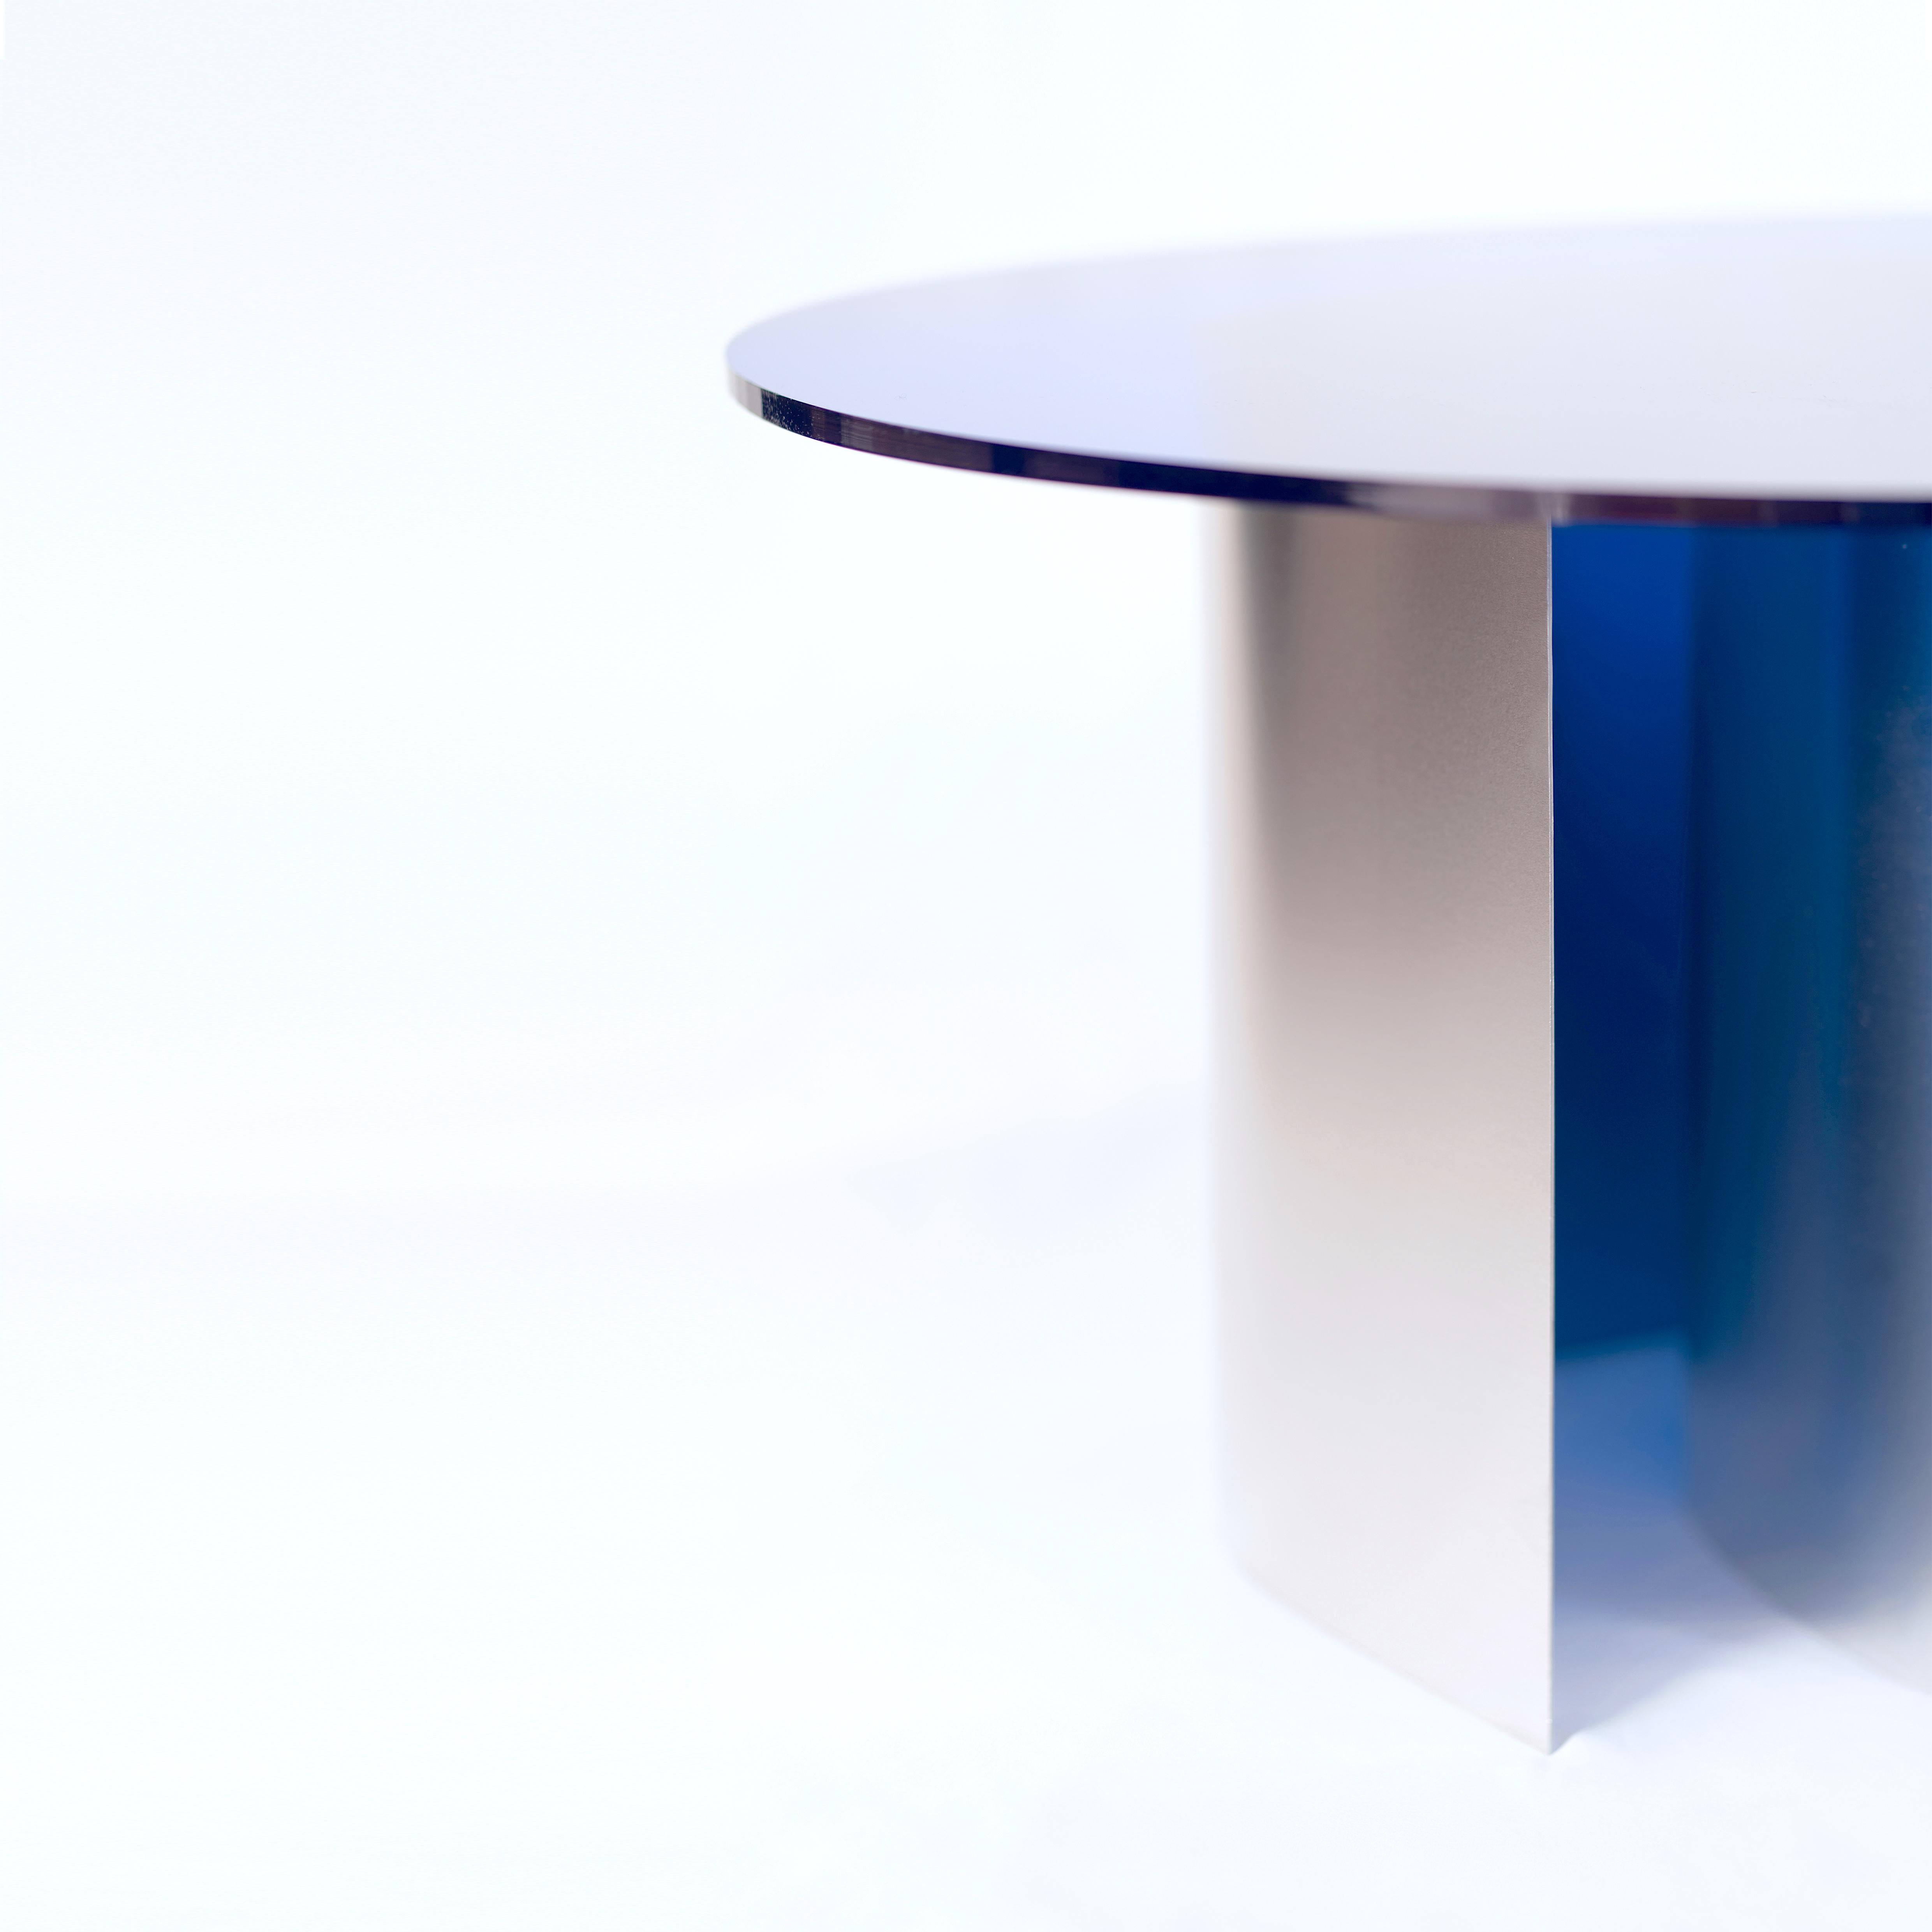 BT01 is a coffee table characterised by simple and pure shapes. A sculptural/functional object realized by a unique shaped-by-hand aluminum base and a round colourful PMMA top. The designer, operating as a sculptor, directly interacts with